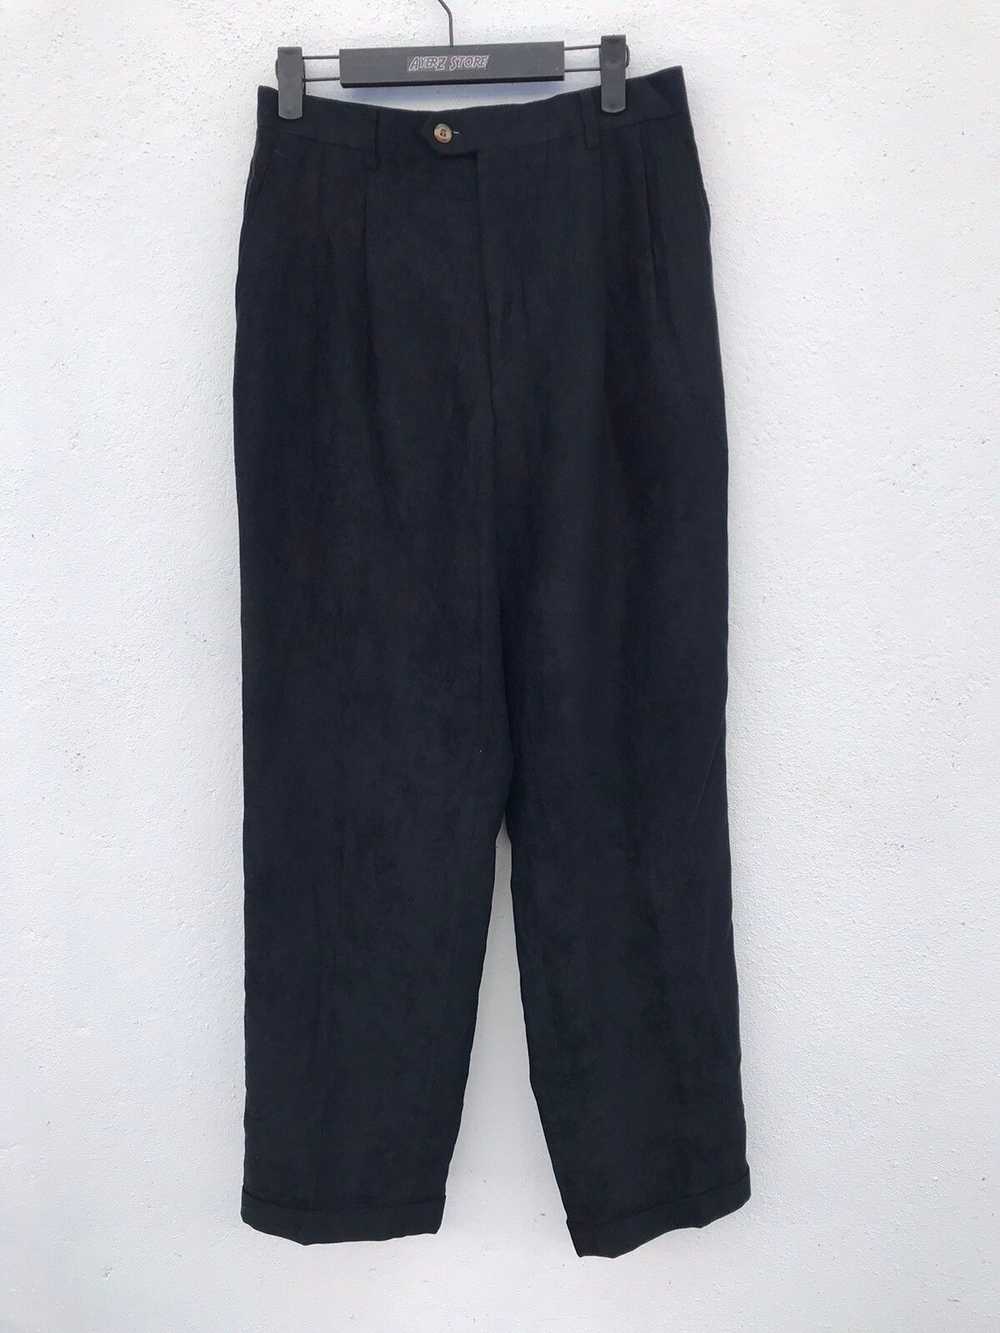 Japanese Brand Marie Claire Corduroy Pants - image 1